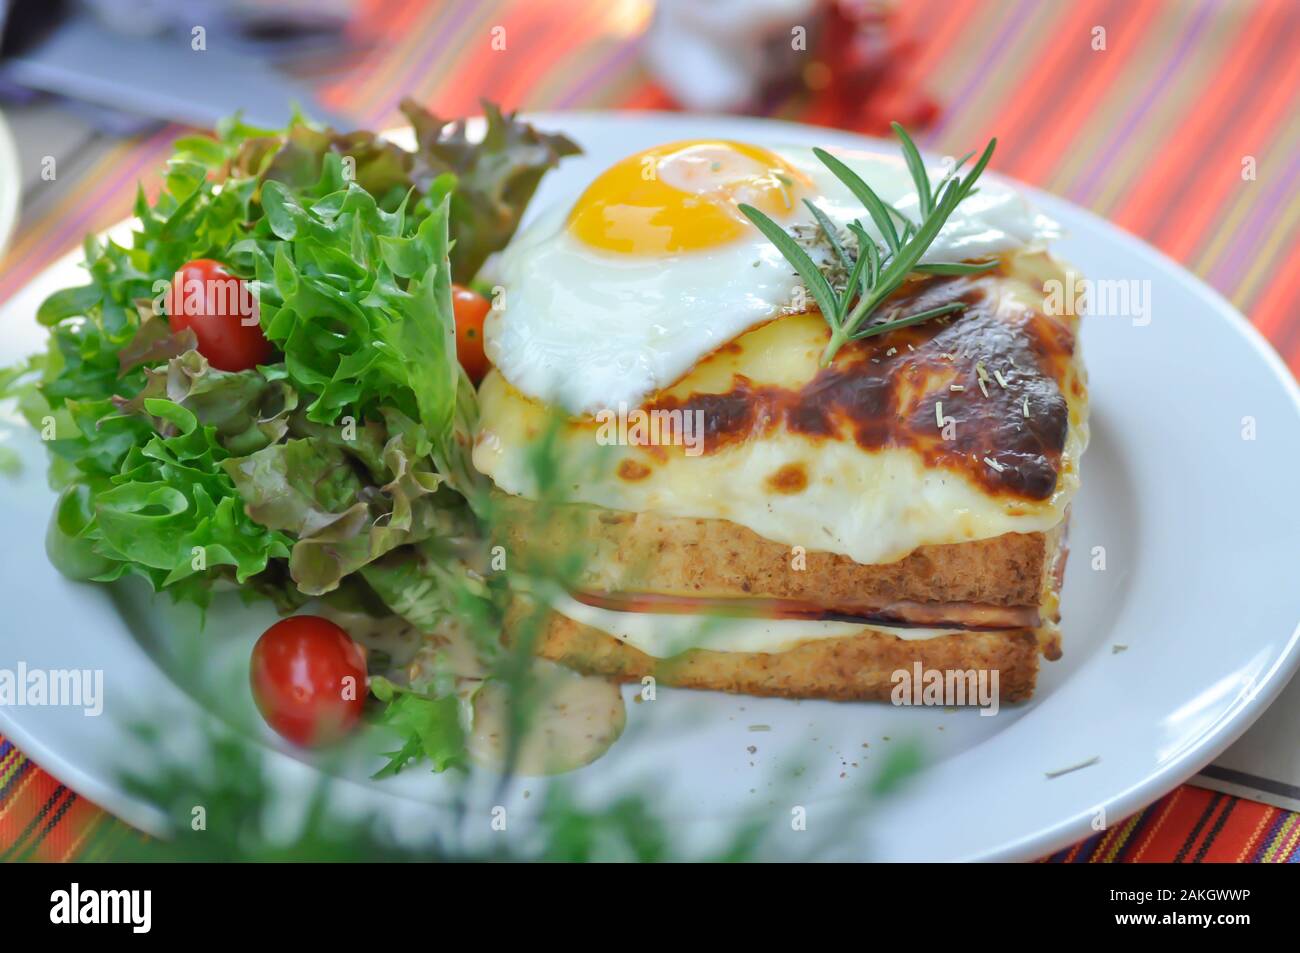 toast or cheese and egg sandwich with salad Stock Photo